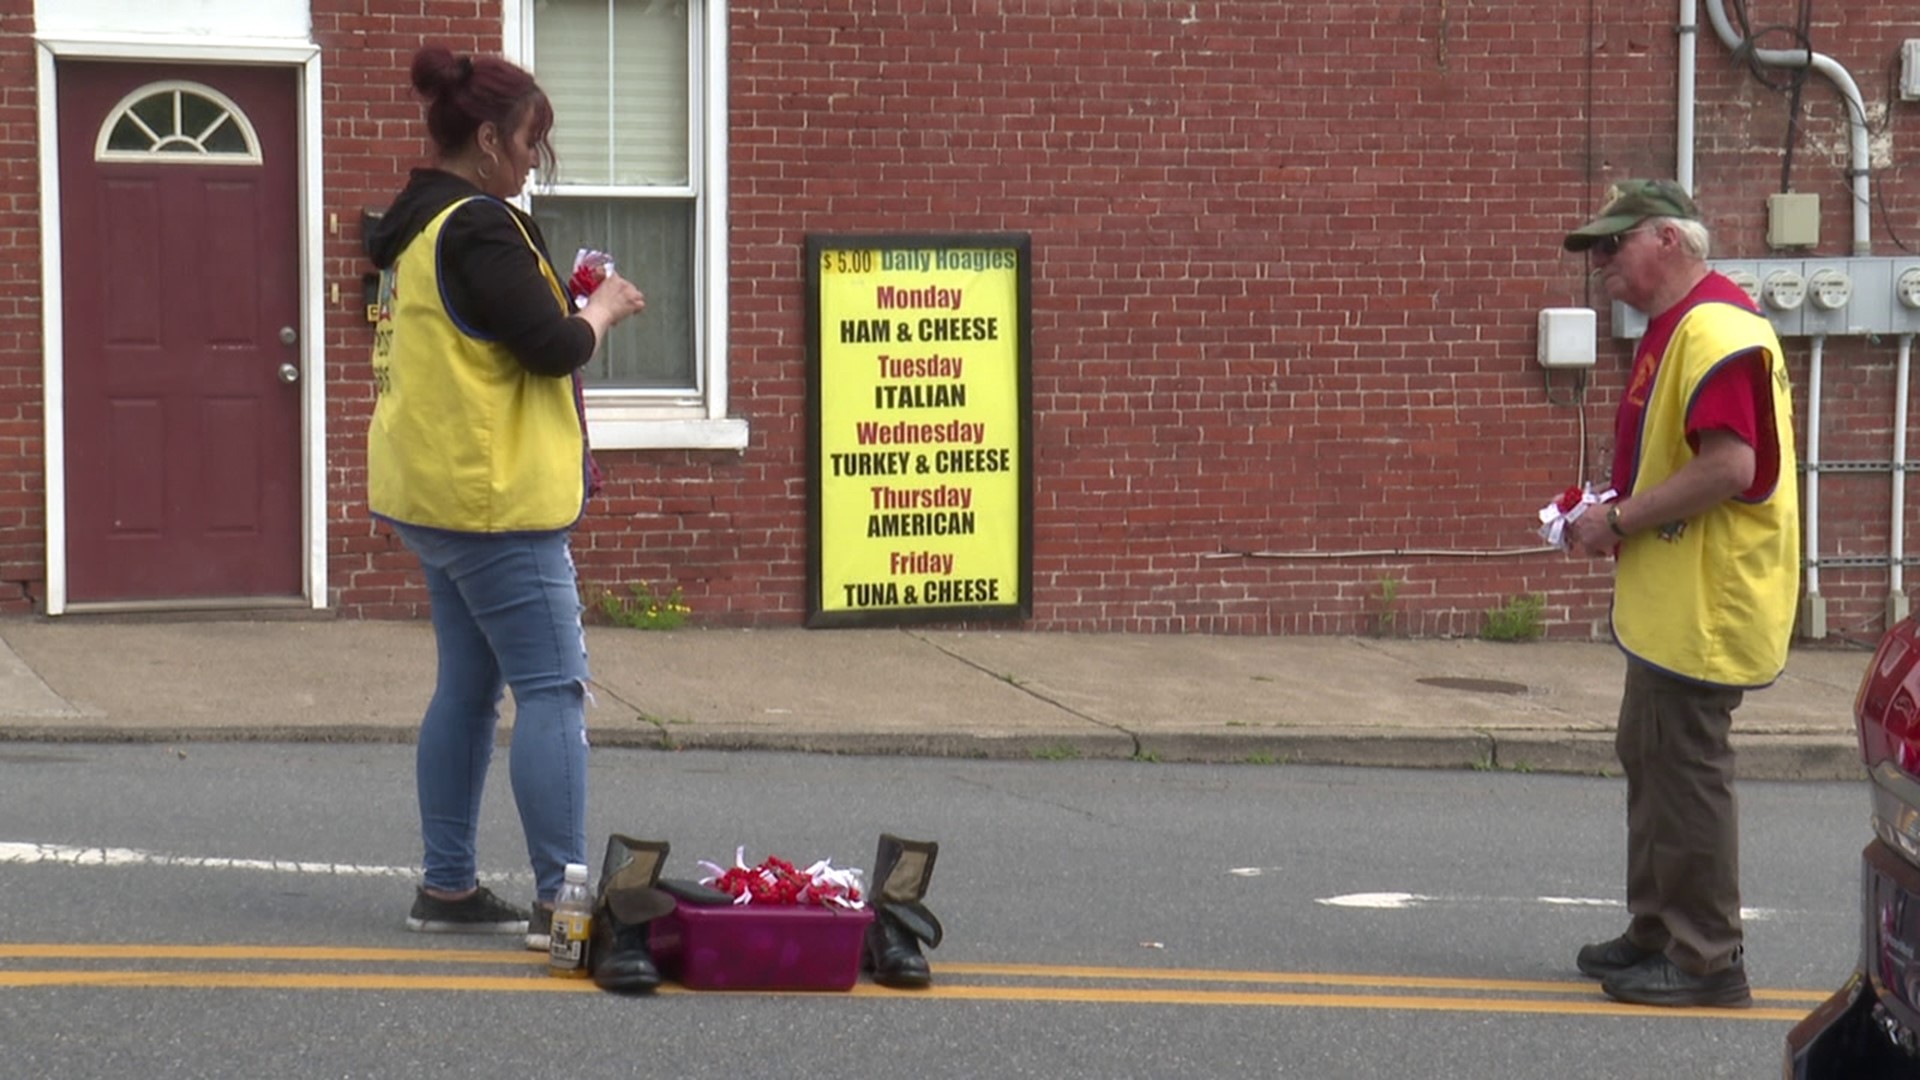 The VFW held the poppy sale along Main Street in White Haven Sunday morning.